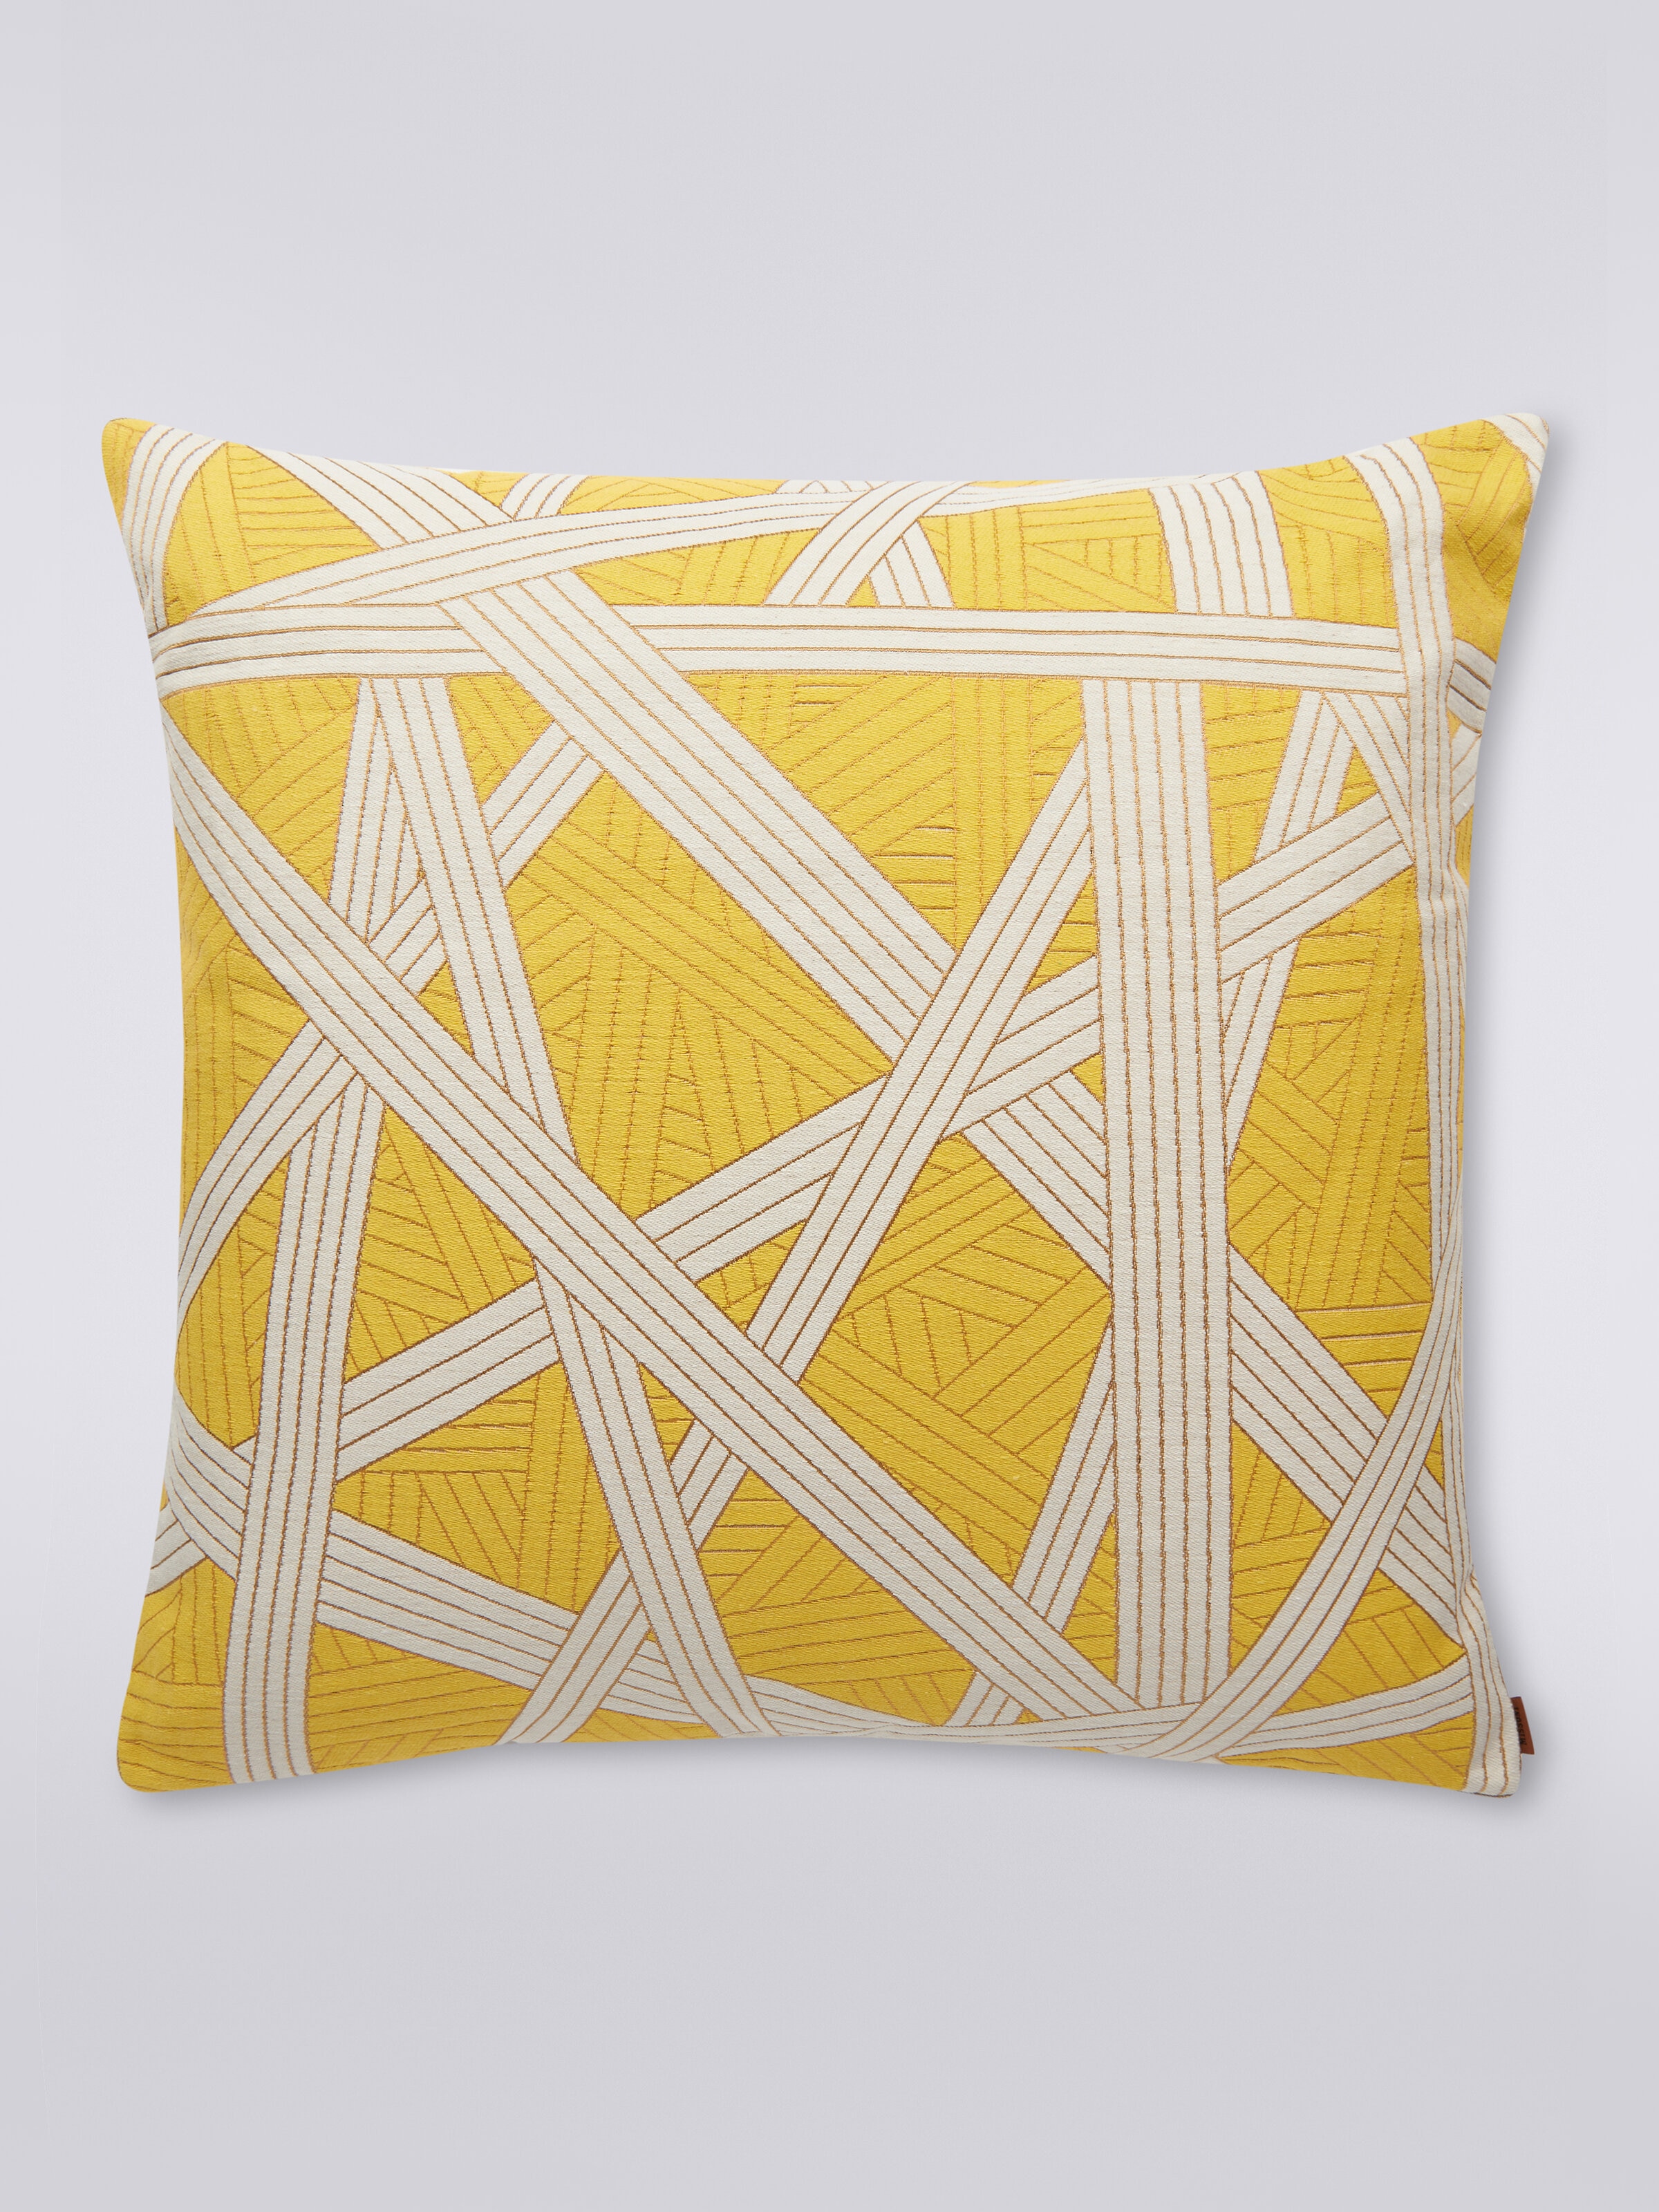 Nastri cushion 60x60 cm with contrasting stitching, Yellow  - 0